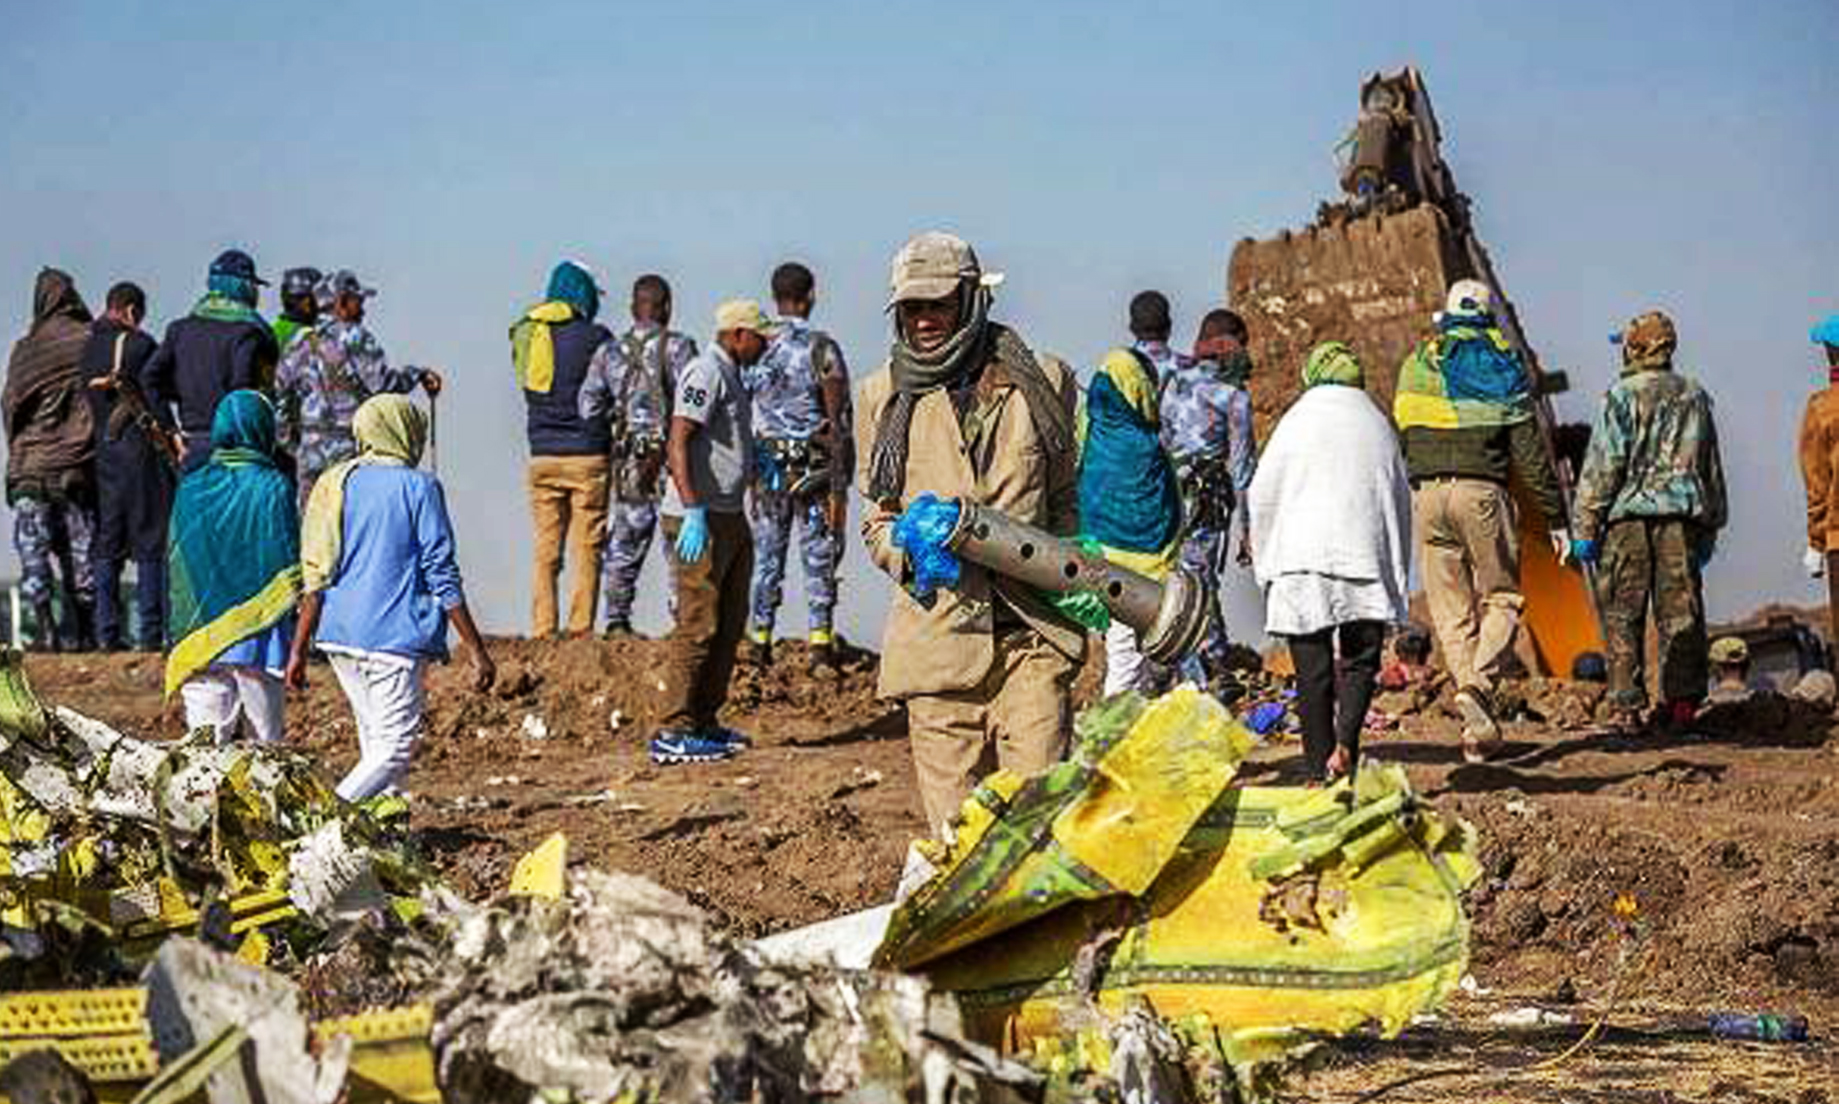 US Law firm to assist victims of Ethiopian Airline crash